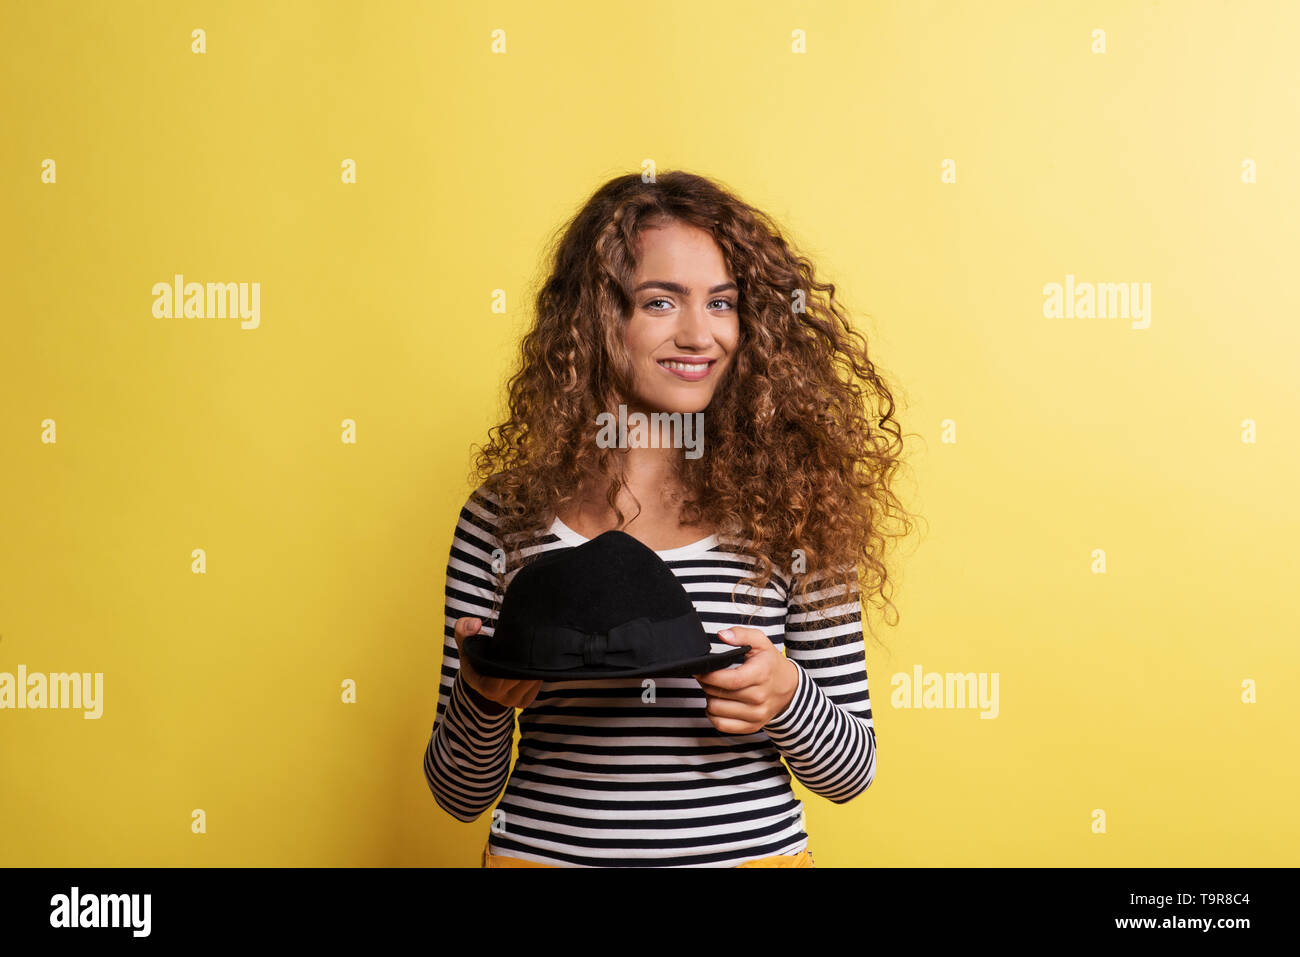 Portrait of a young woman with black hat in a studio on a yellow background. Stock Photo